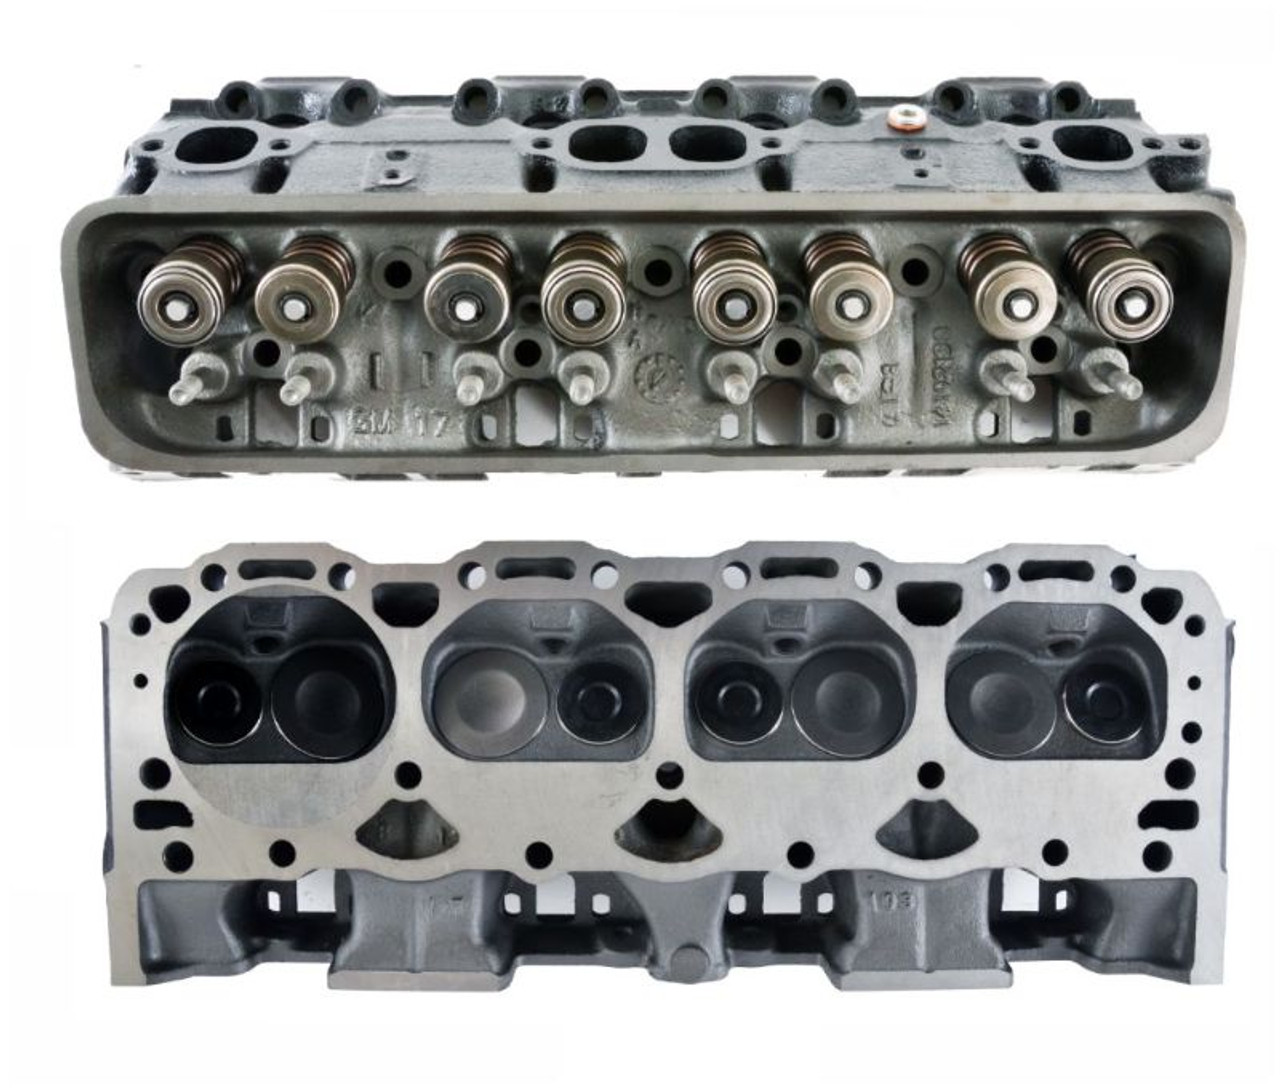 Cylinder Head Assembly - 1996 Chevrolet Express 3500 5.7L (CH1064R.K293)